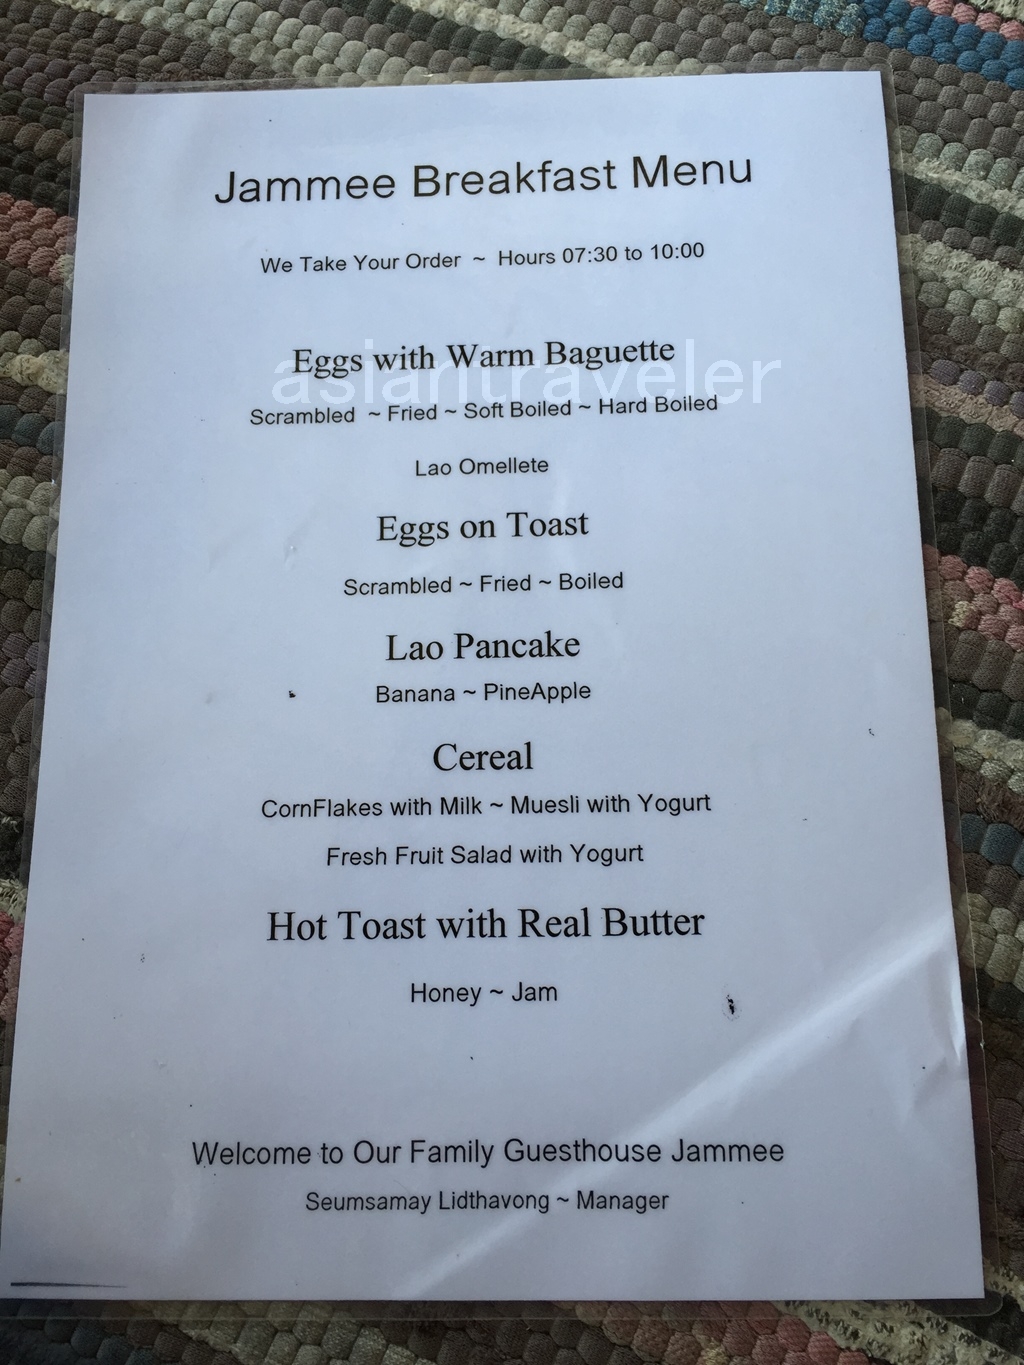 Jammee Guesthouse（ジャミーゲストハウス）の朝食メニュー